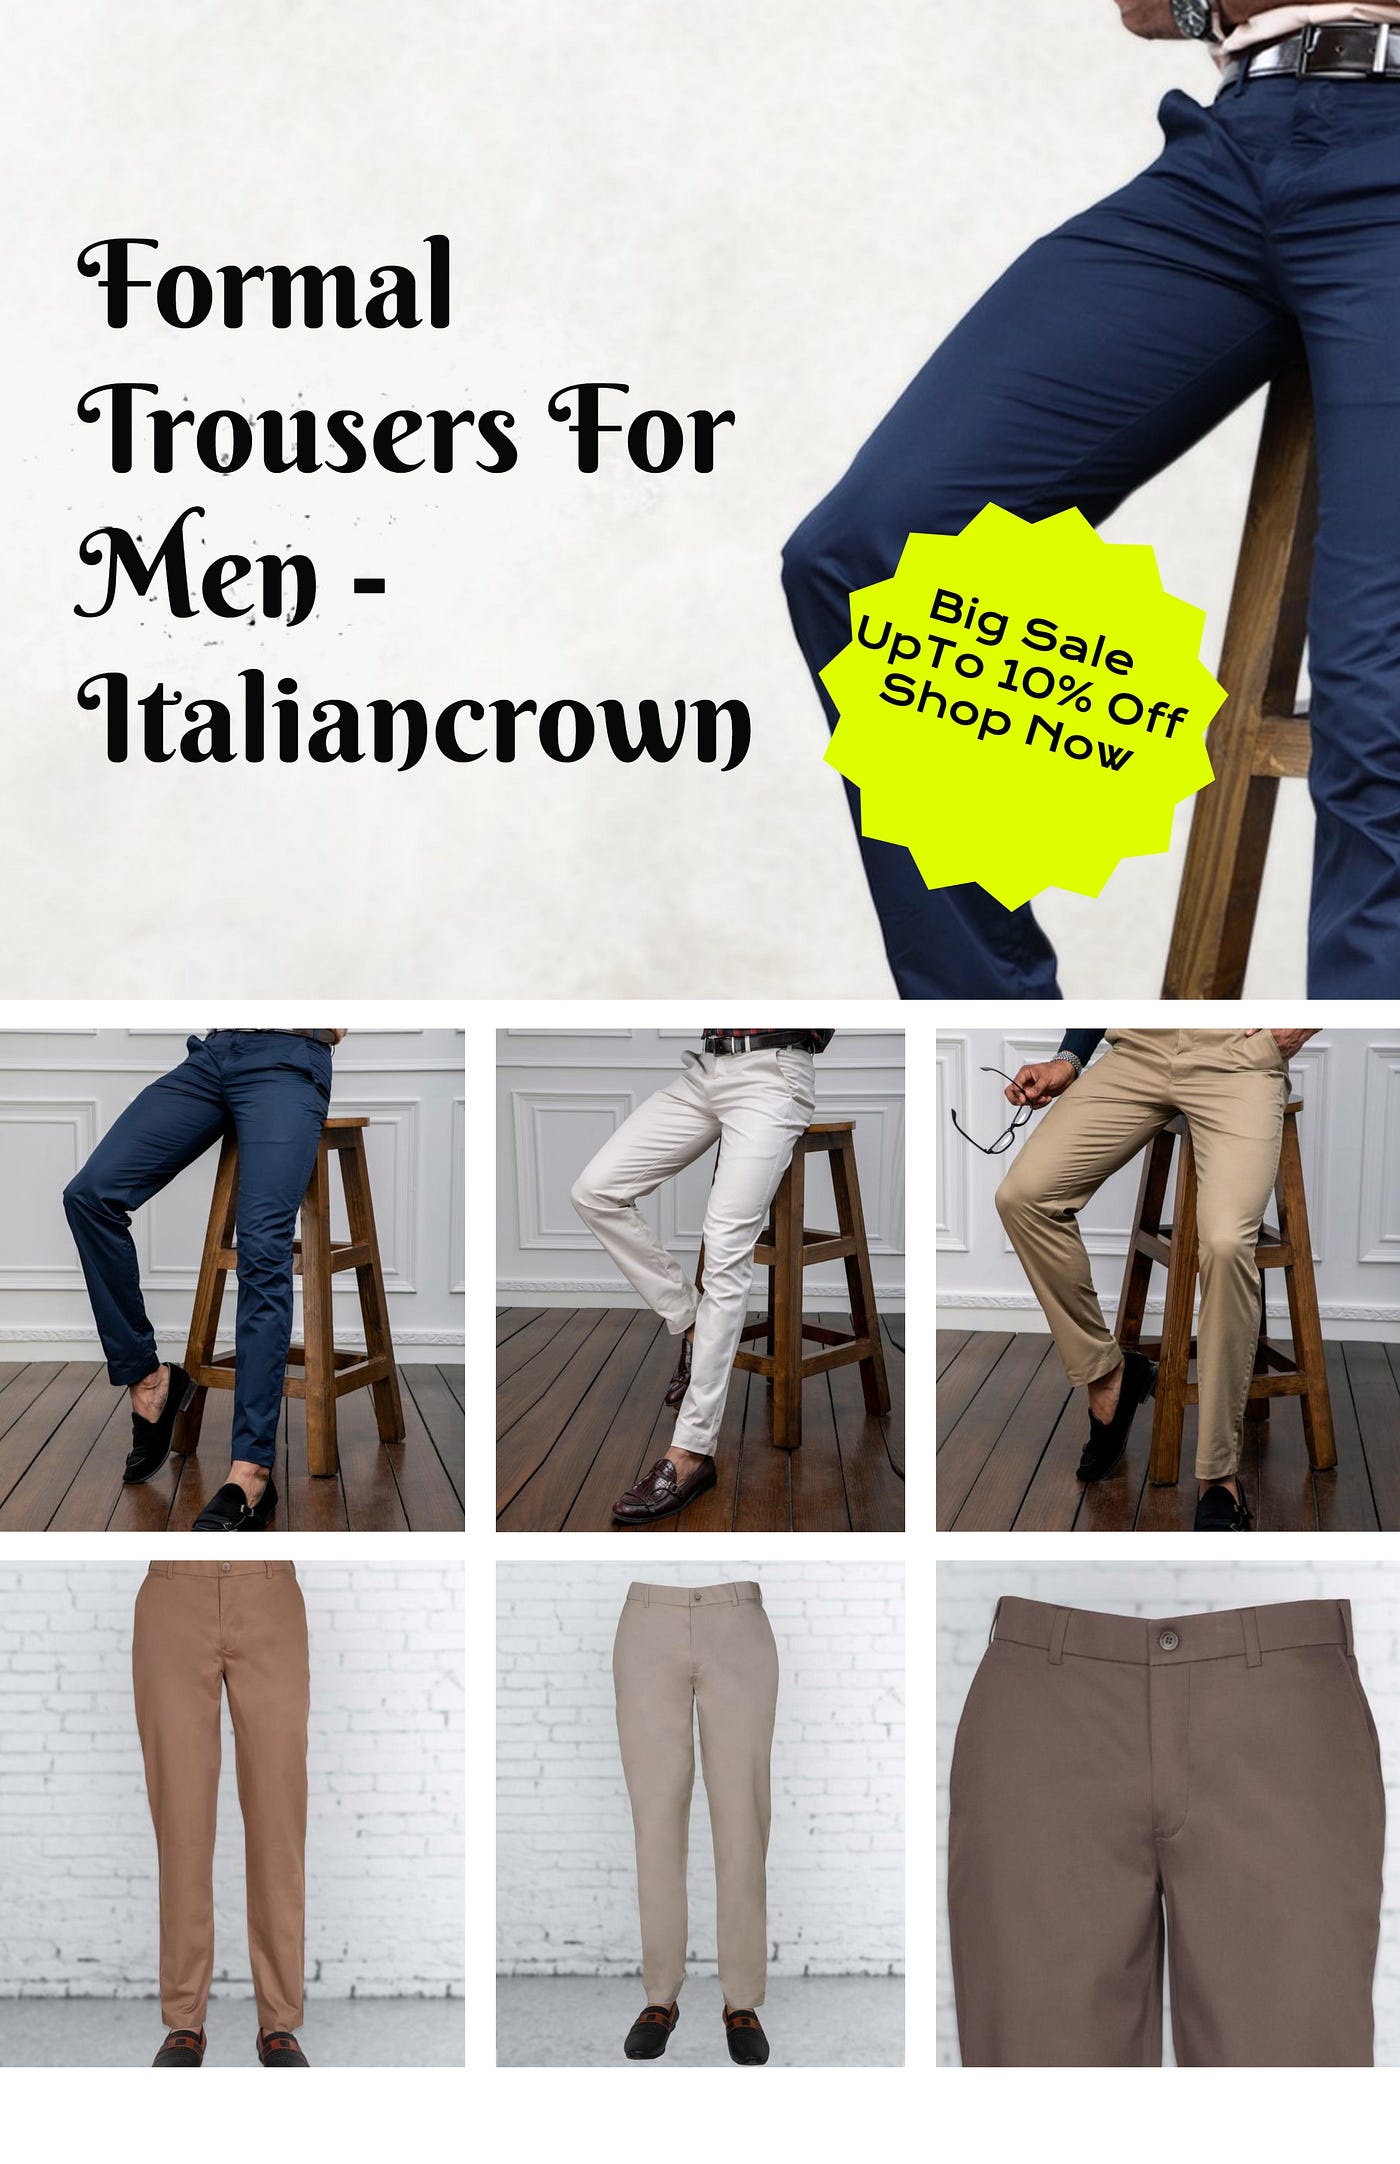 6 Types Of Formal Pants Well Suited For All Events! — Italiancrown